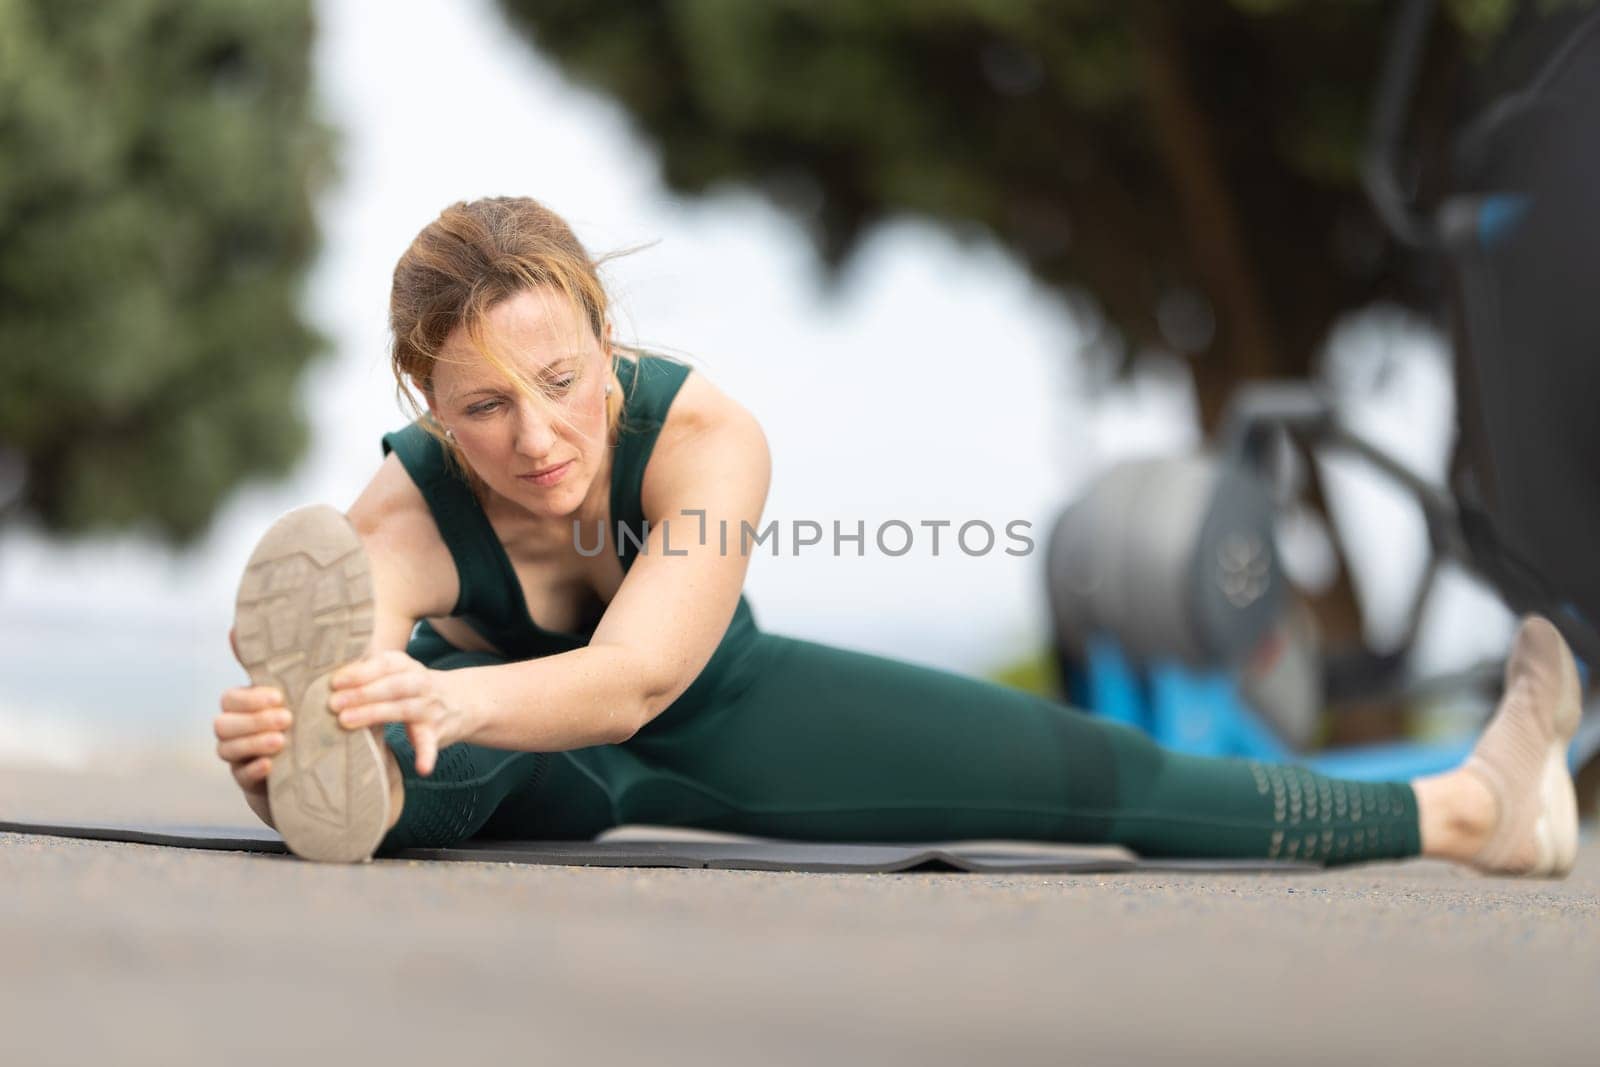 Adult sportive woman sitting in a splits at the outdoor sports ground and stretching to the side to her leg. Mid shot